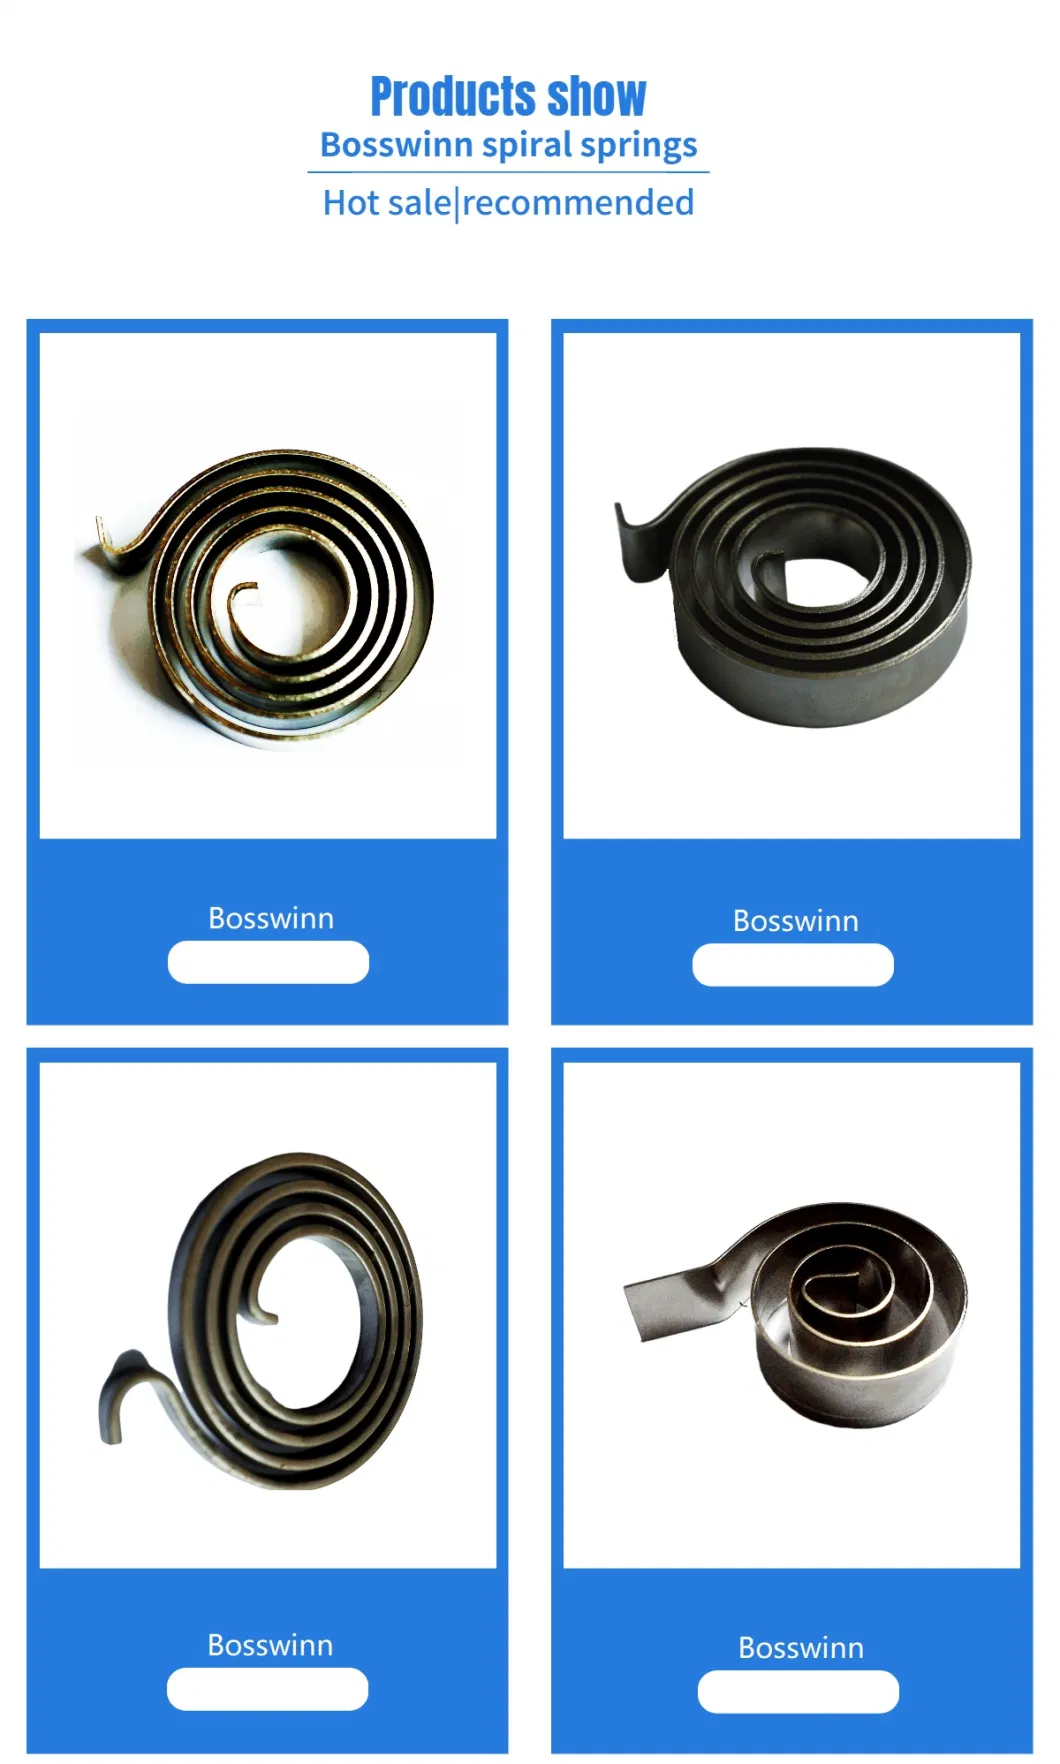 Tailor-Made High-Carbon Alloyed Flat Spring Steel Wires Specific Power Springs